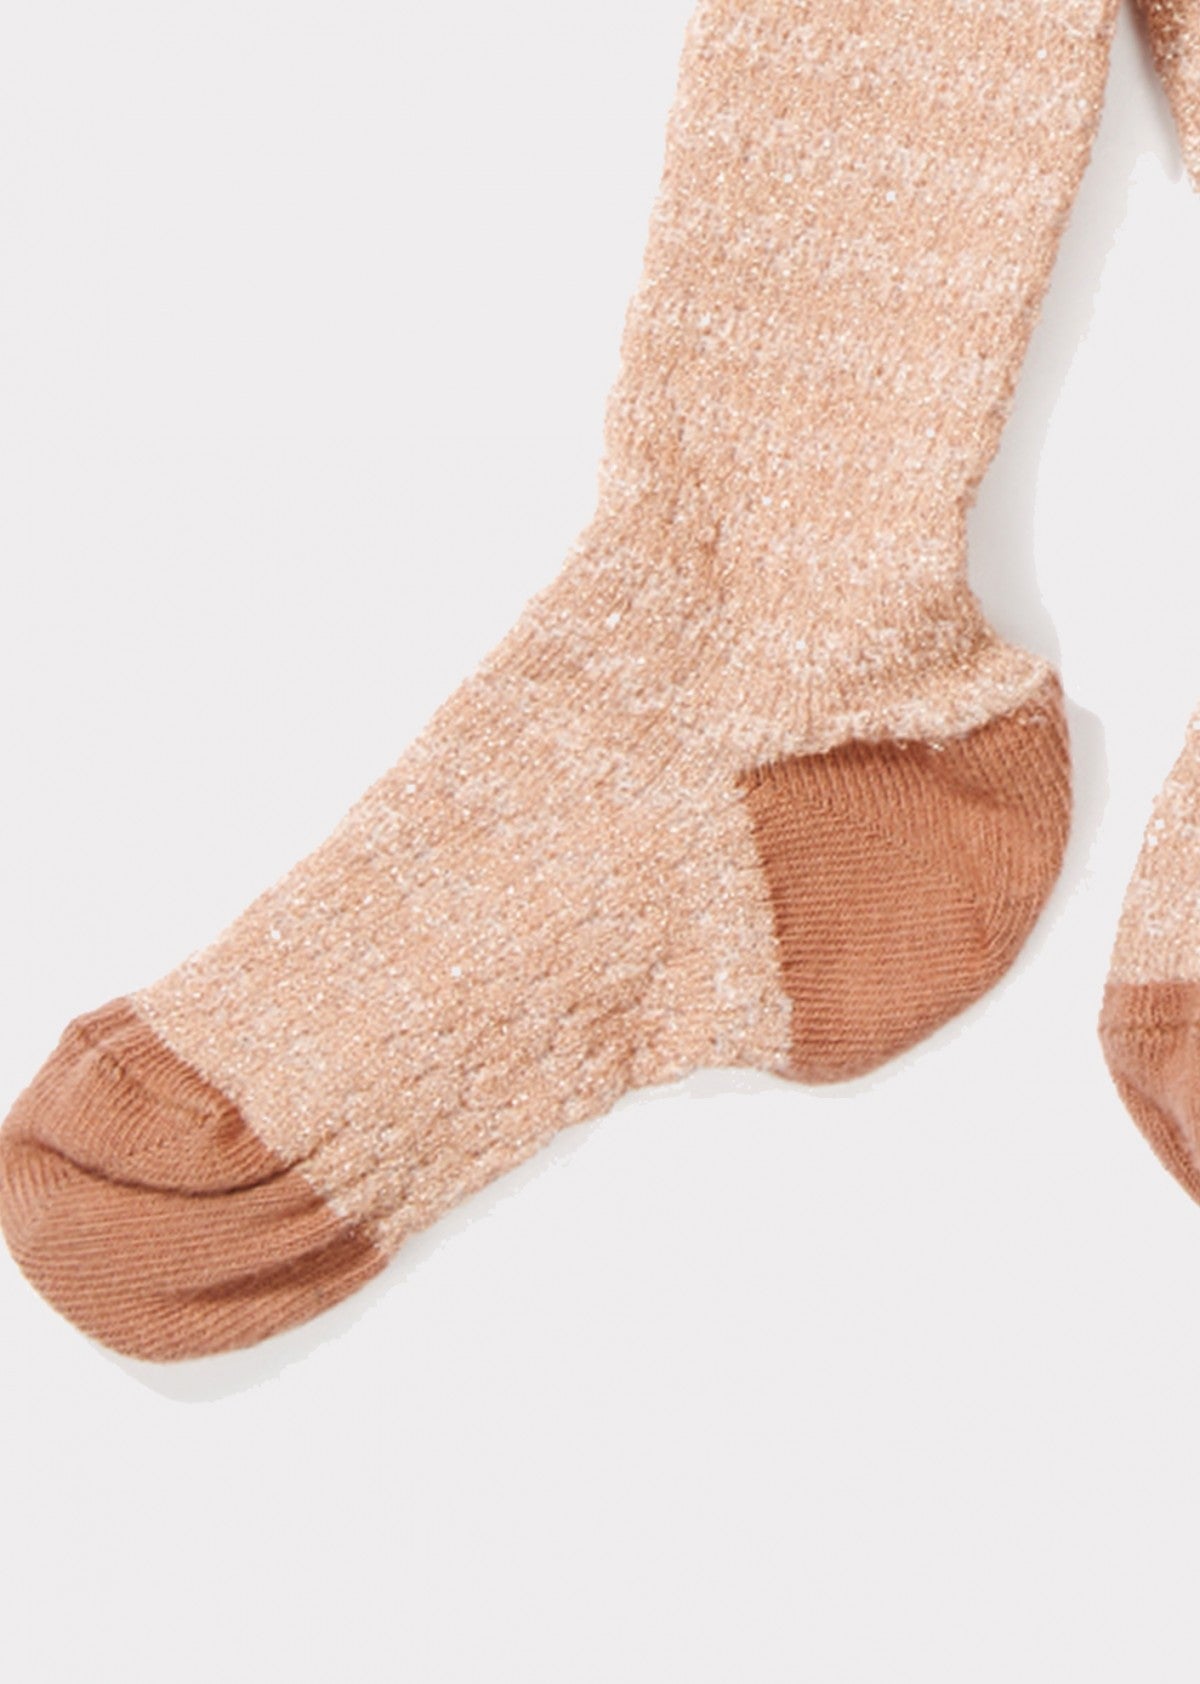 Girls Knitted Party Socks